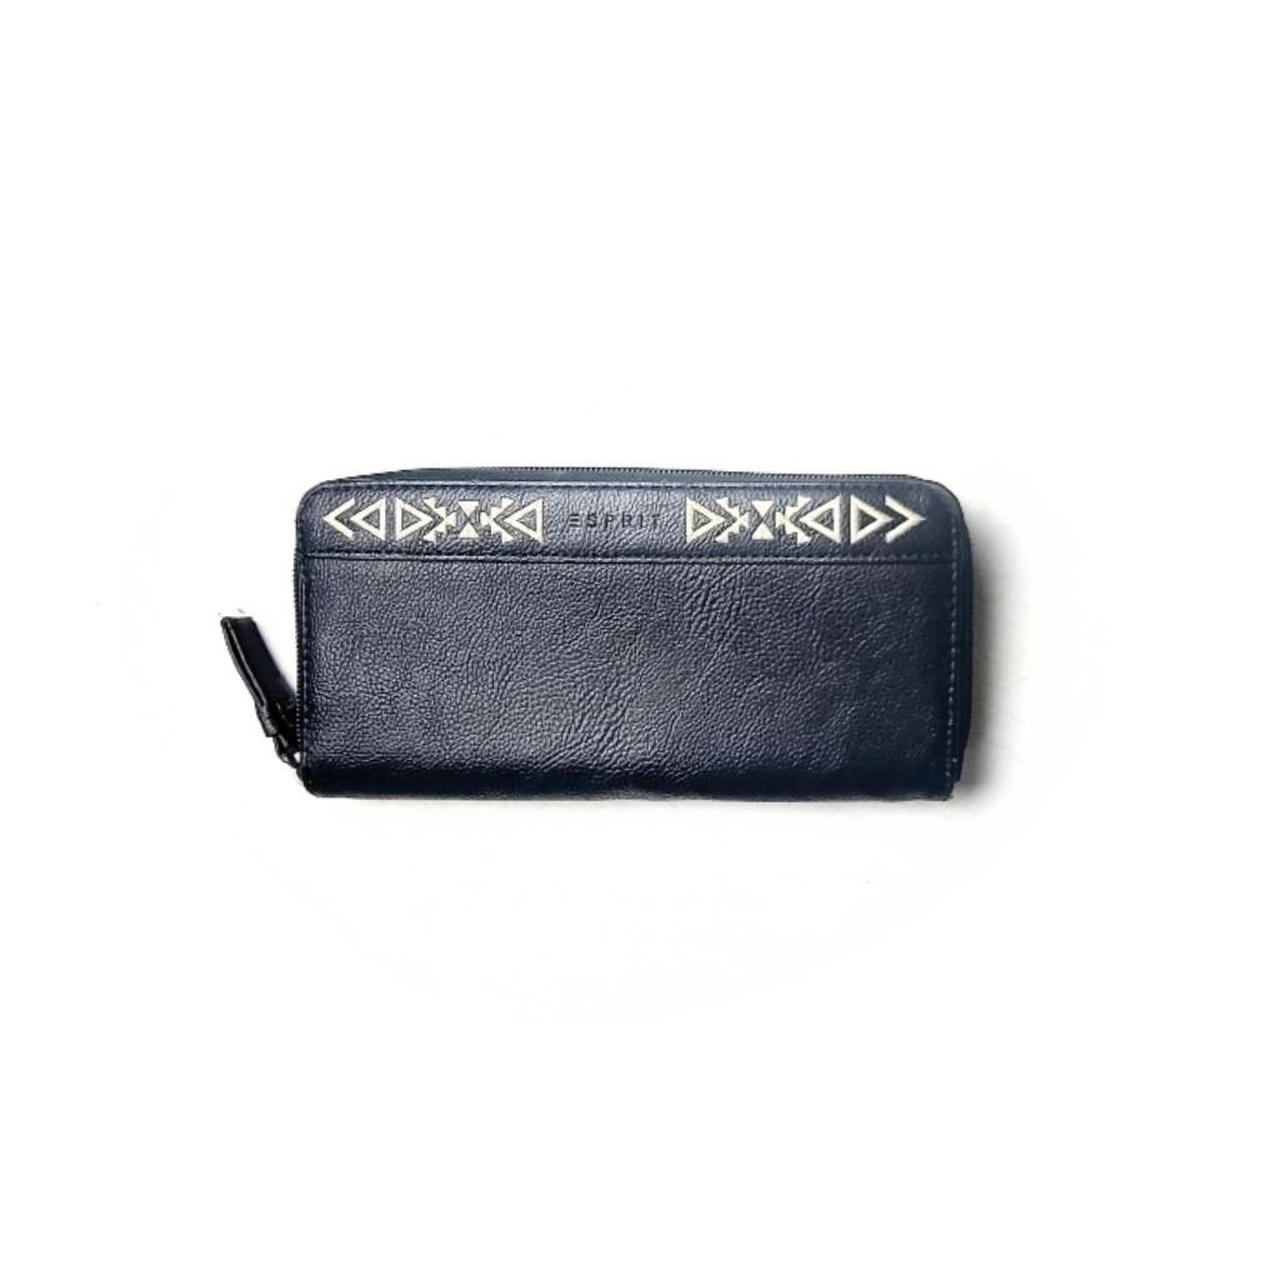 Product Image 1 - Esprit Wallet

Black Leather with white